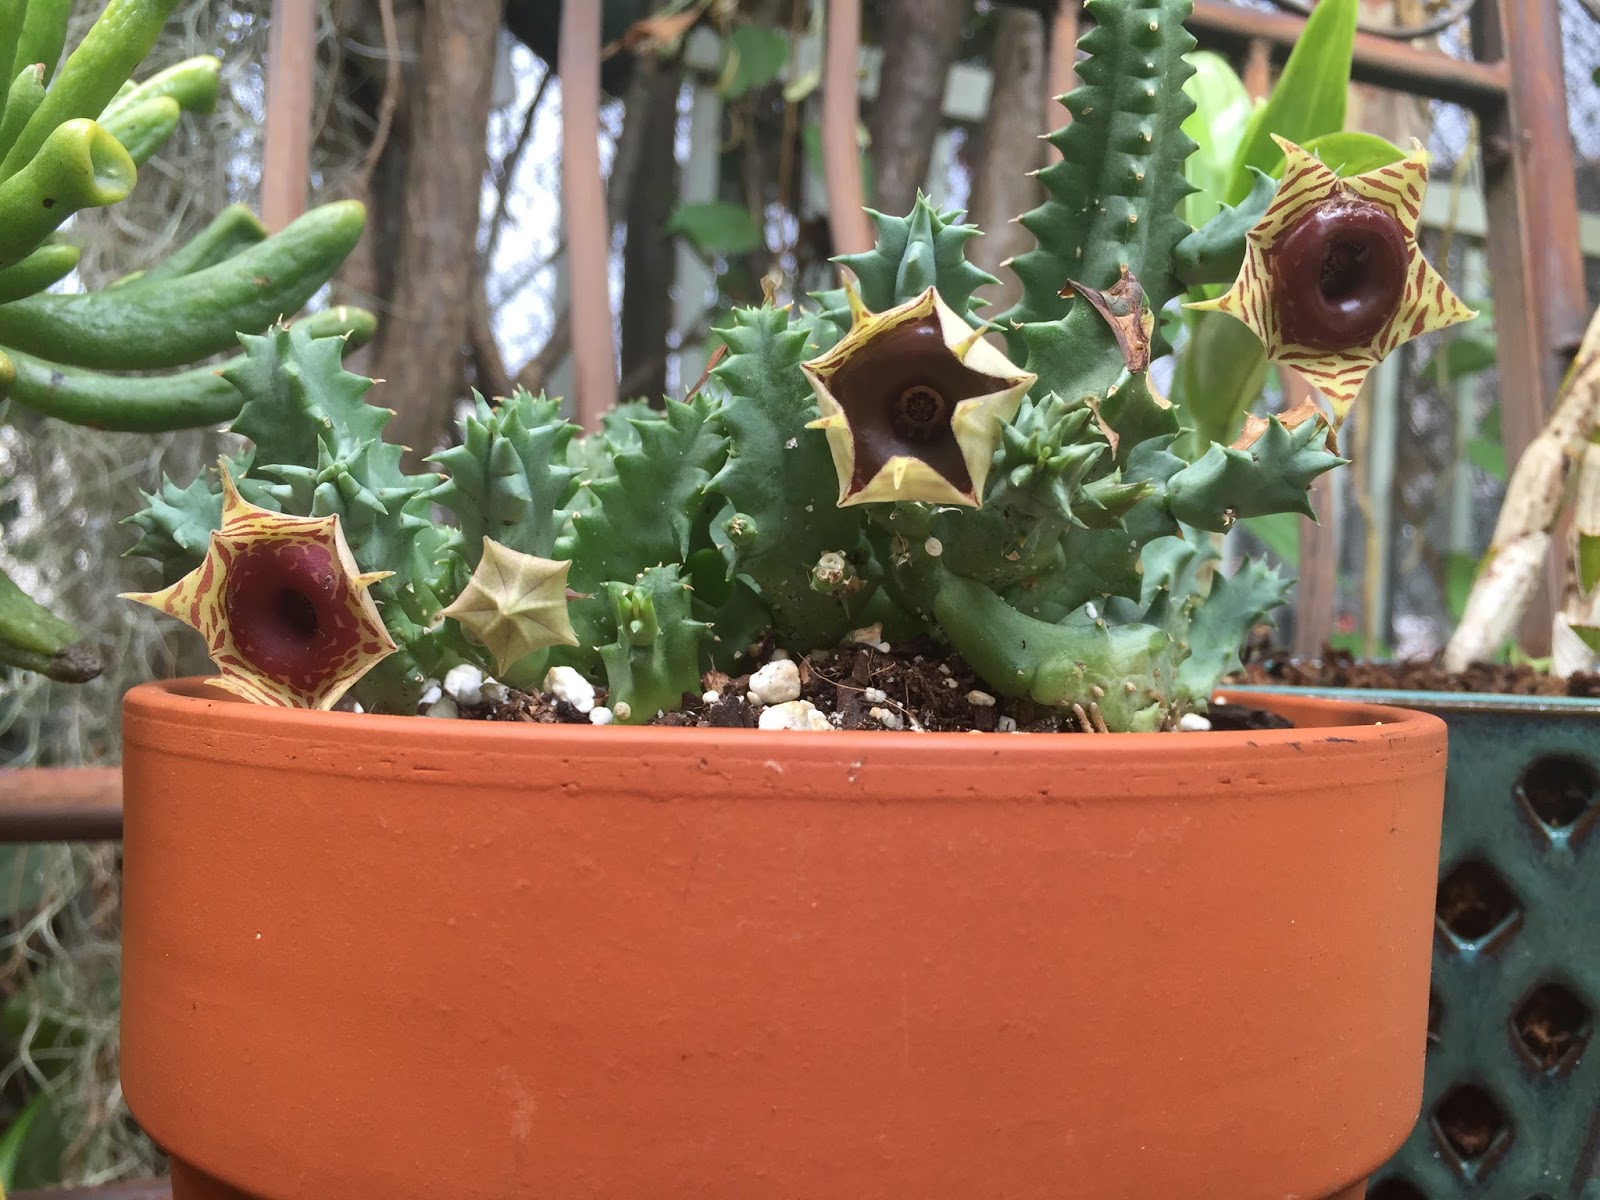 Huernia tanganyikensis Succulent potted Home Garden decoration Plants 